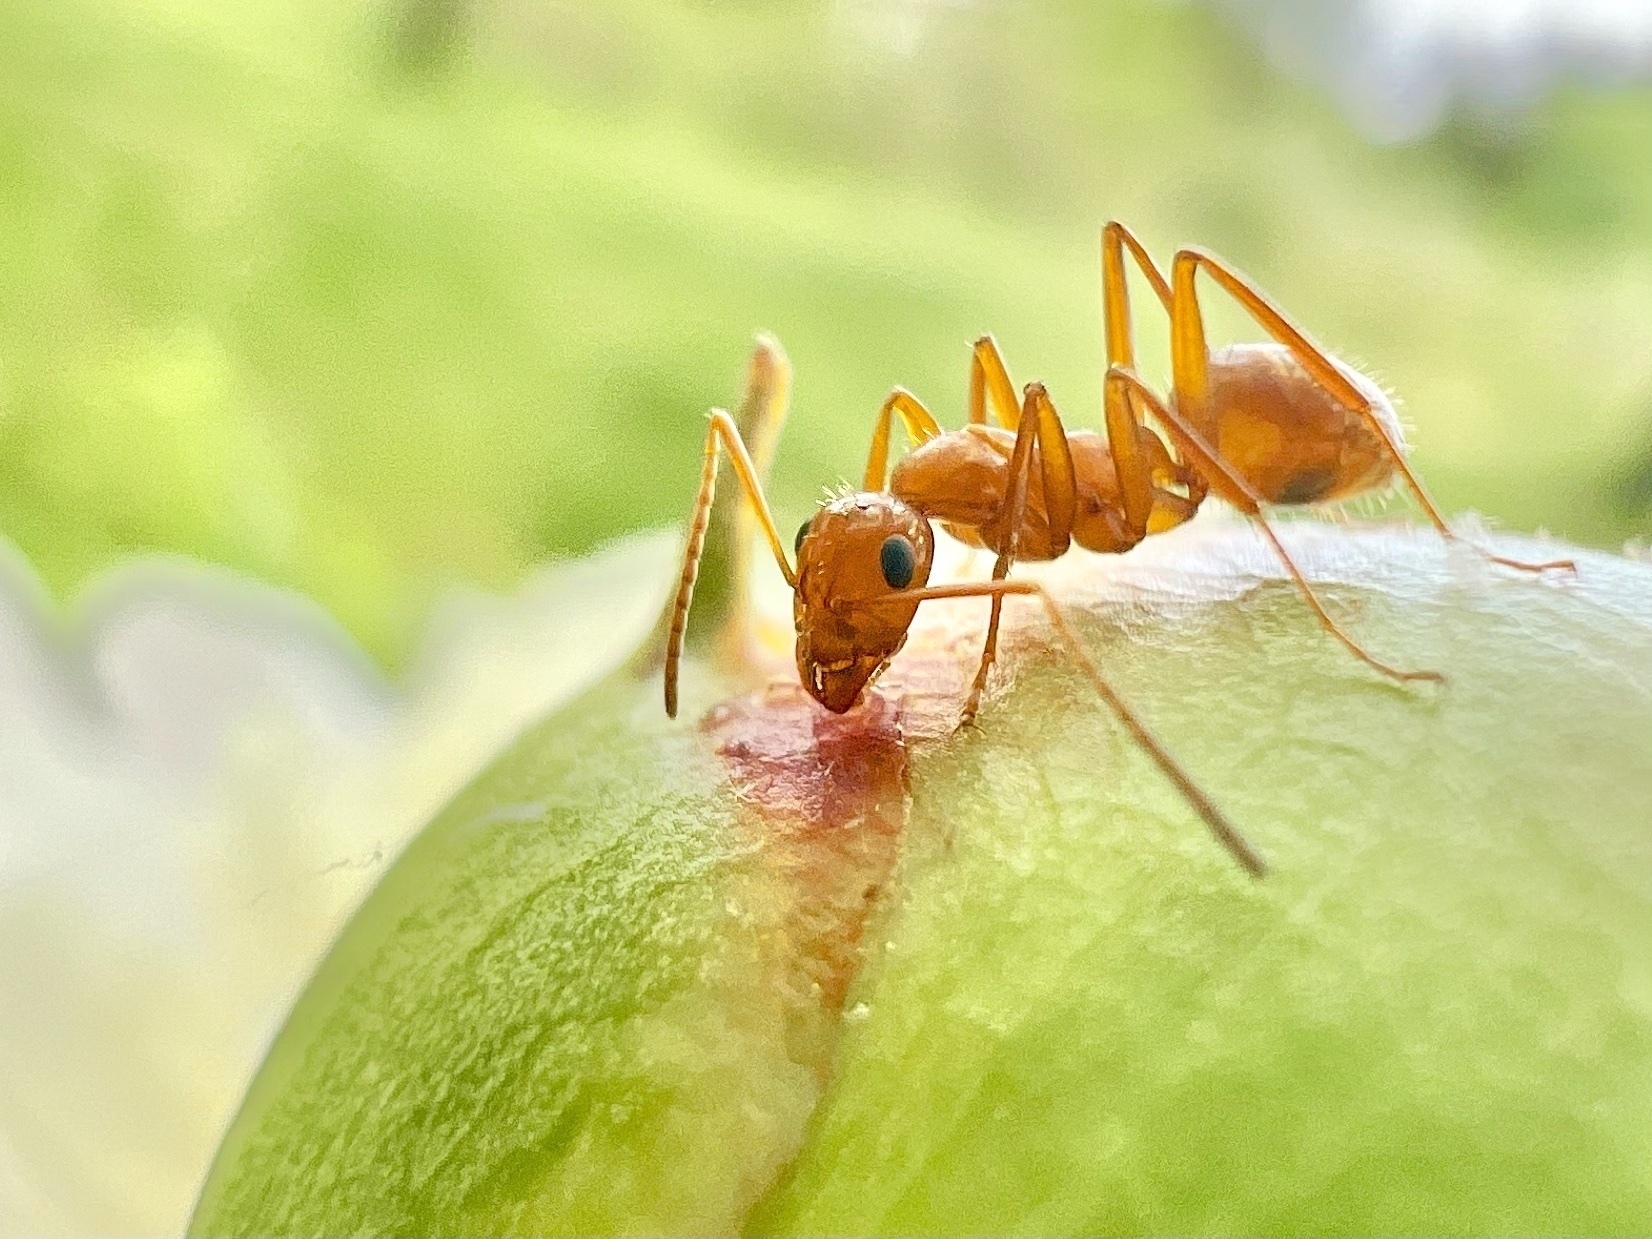 An orange ant is on top of a green bulb of an unopened flower. The ant is facing the camera, aiming towards the left bottom corner 